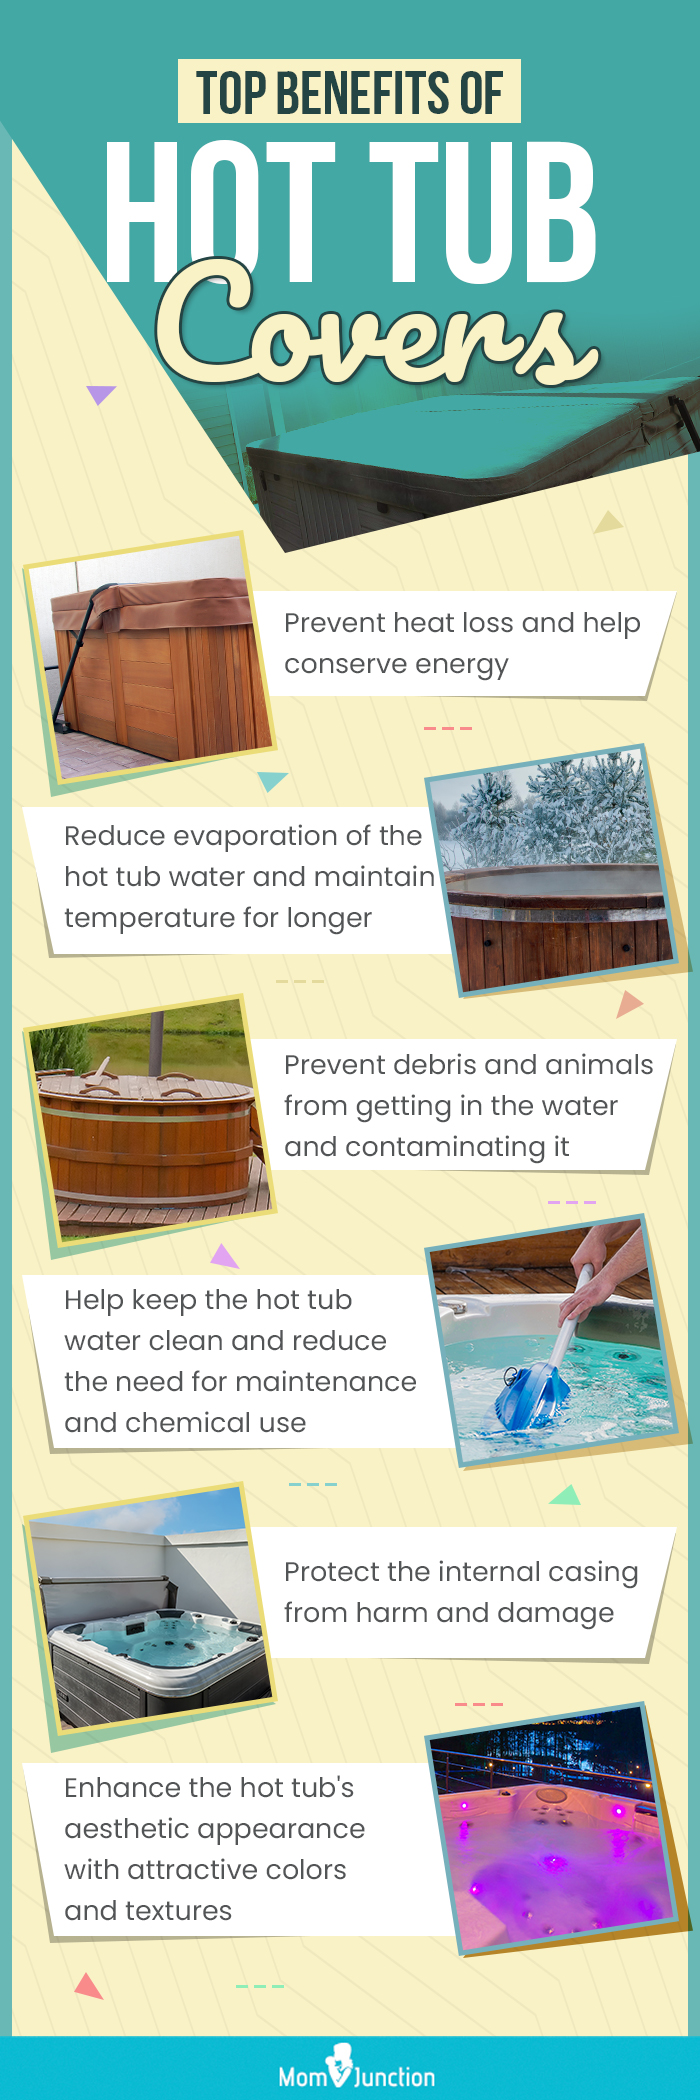 Top Benefits Of Hot Tub Covers (infographic)